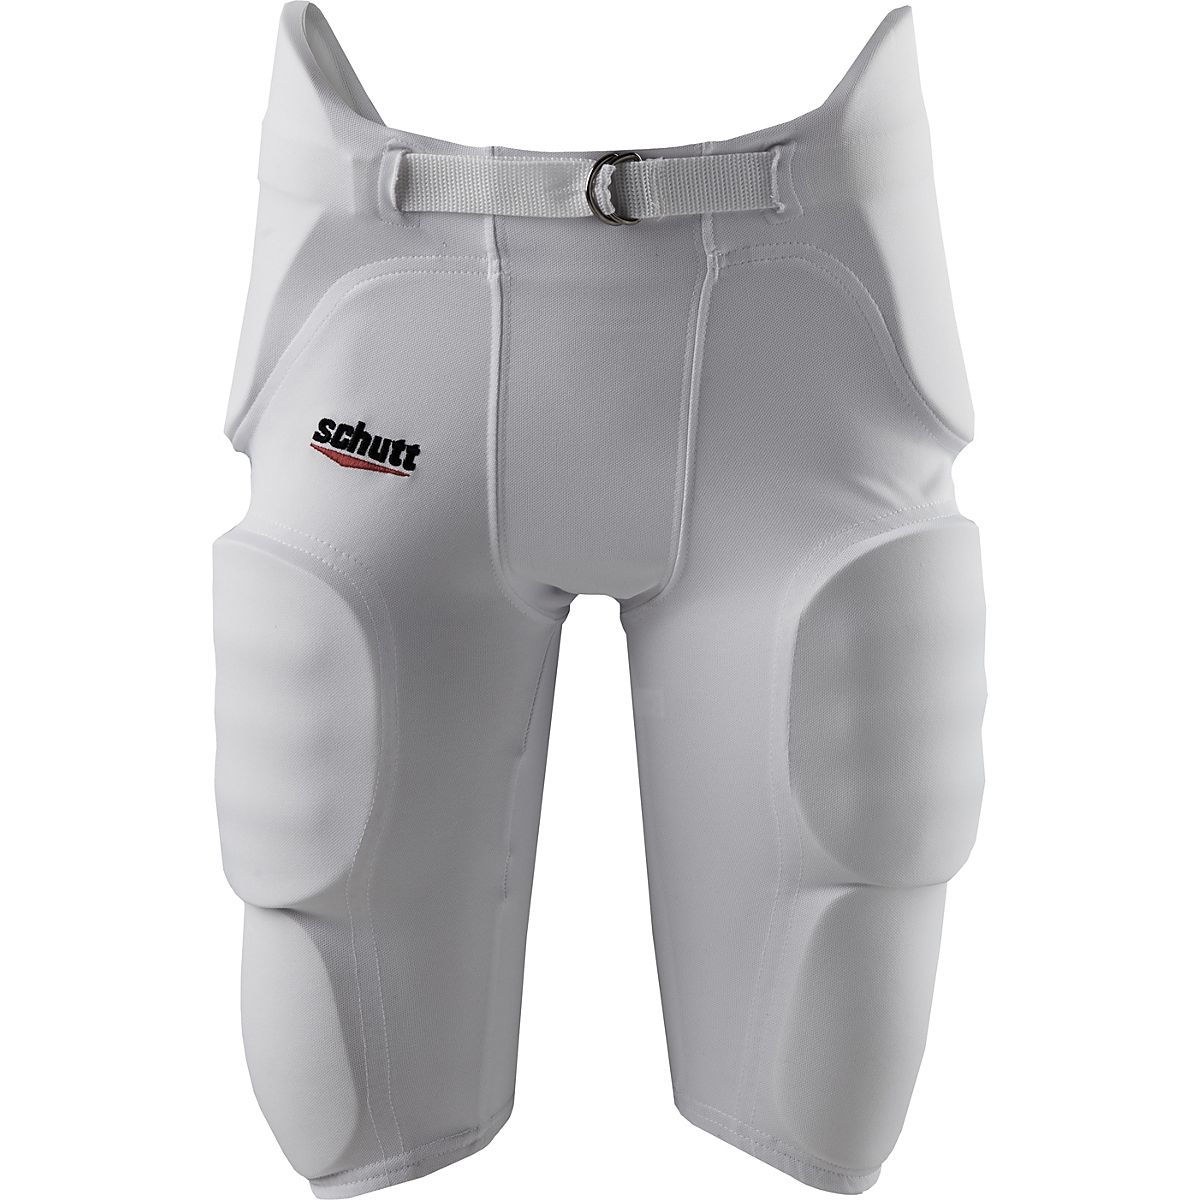  Exxact Sports Proline Integrated Football Pants Youth